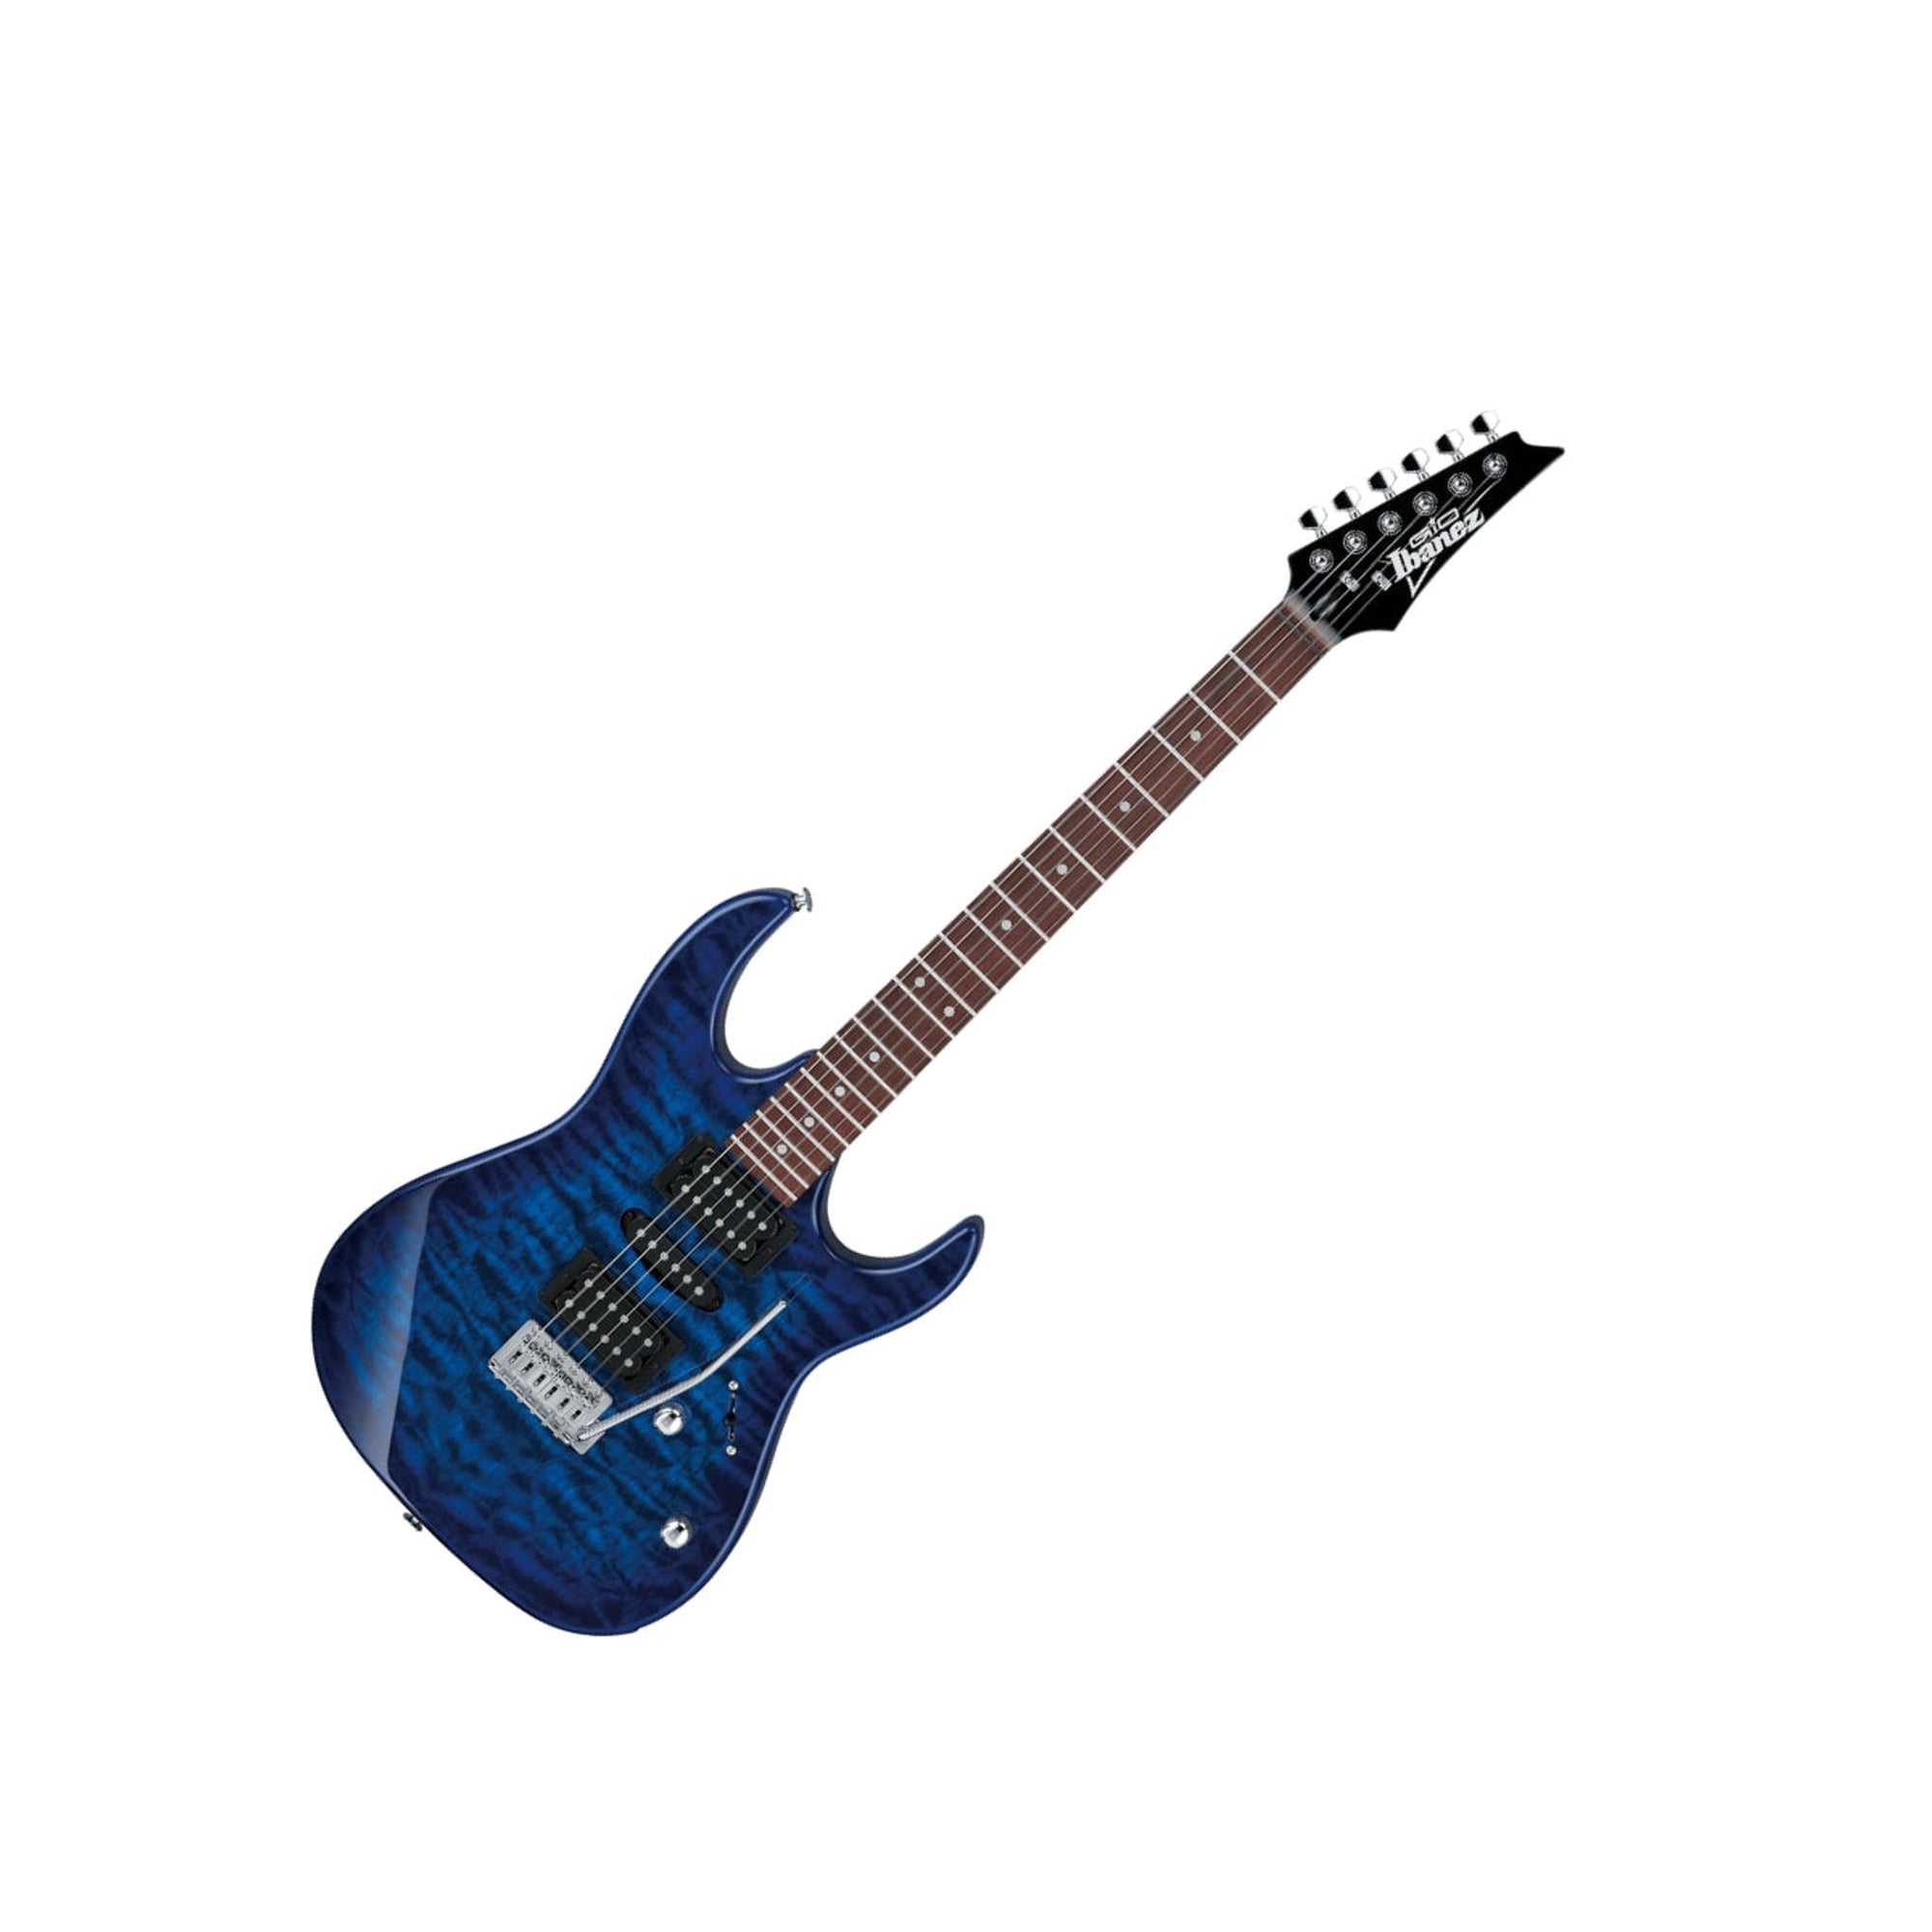 The Ibanez GRX70QA Electric Guitar belongs to the RG series, making it the most recognisable and distinctive guitar in the Ibanez line.